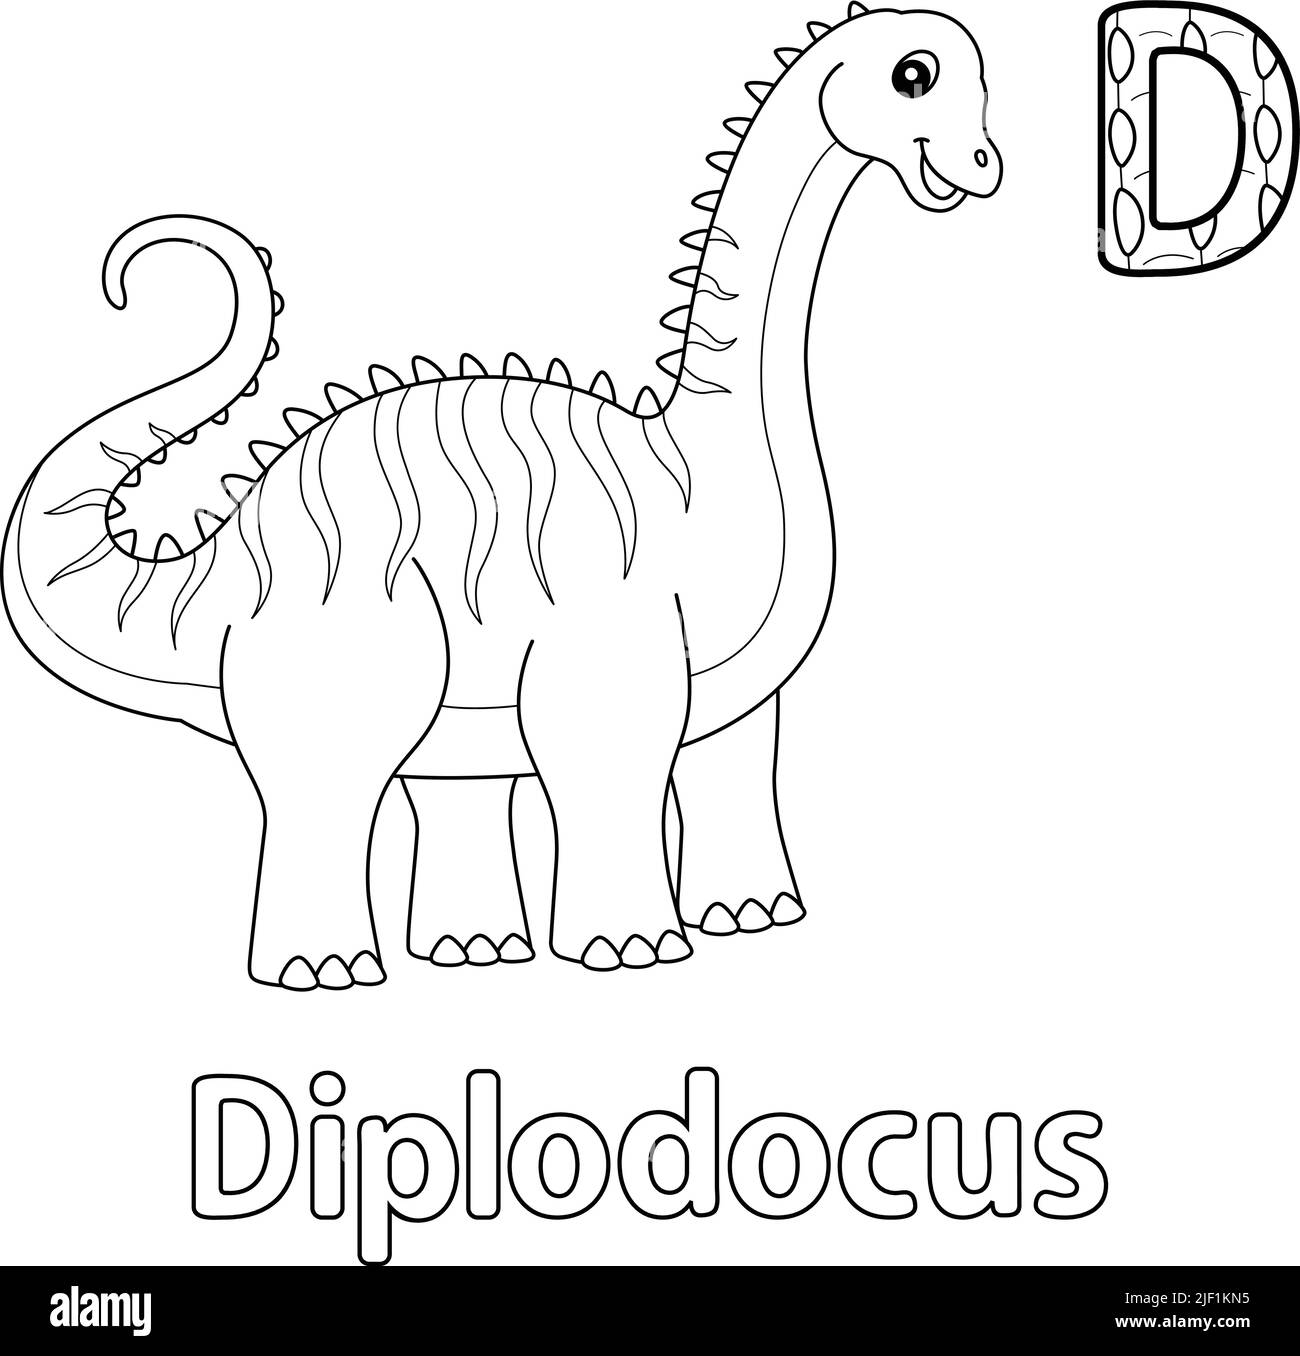 Diplodocus Black and White Stock Photos & Images - Alamy